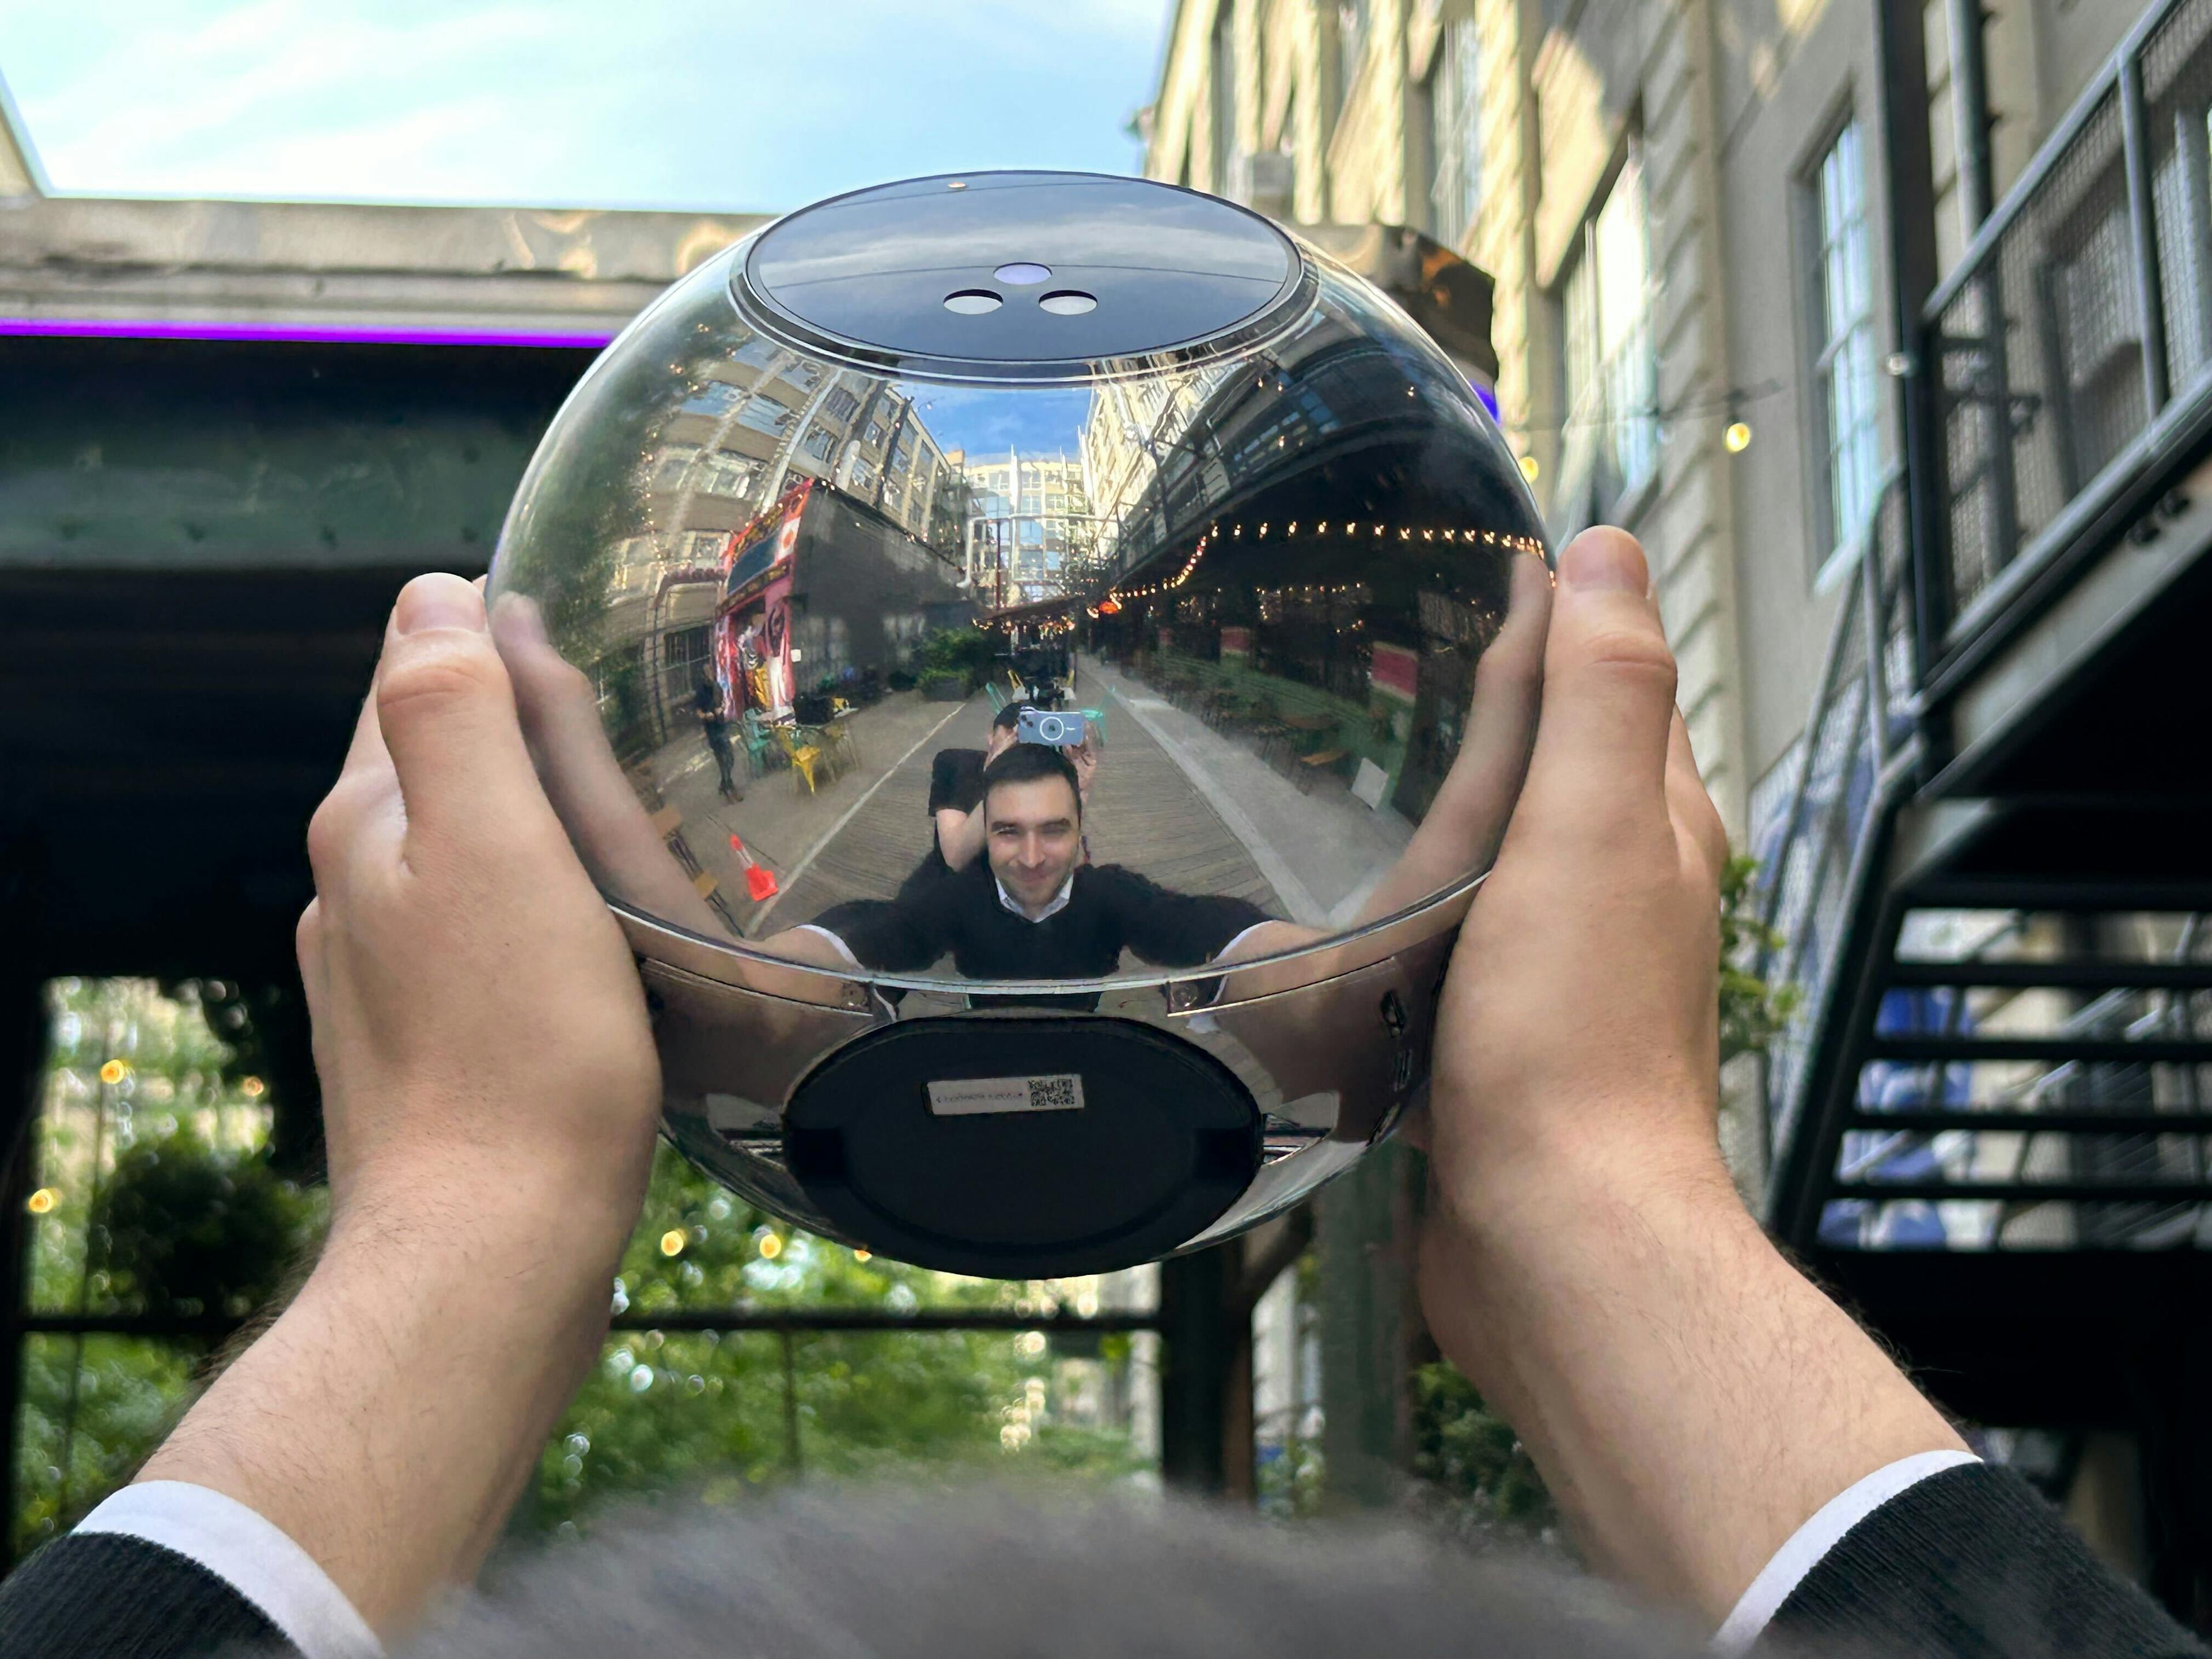 Costing a few thousand dollars to make, Worldcoin's eye-scanning orb is looking to put proof-of-personhood on-chain.